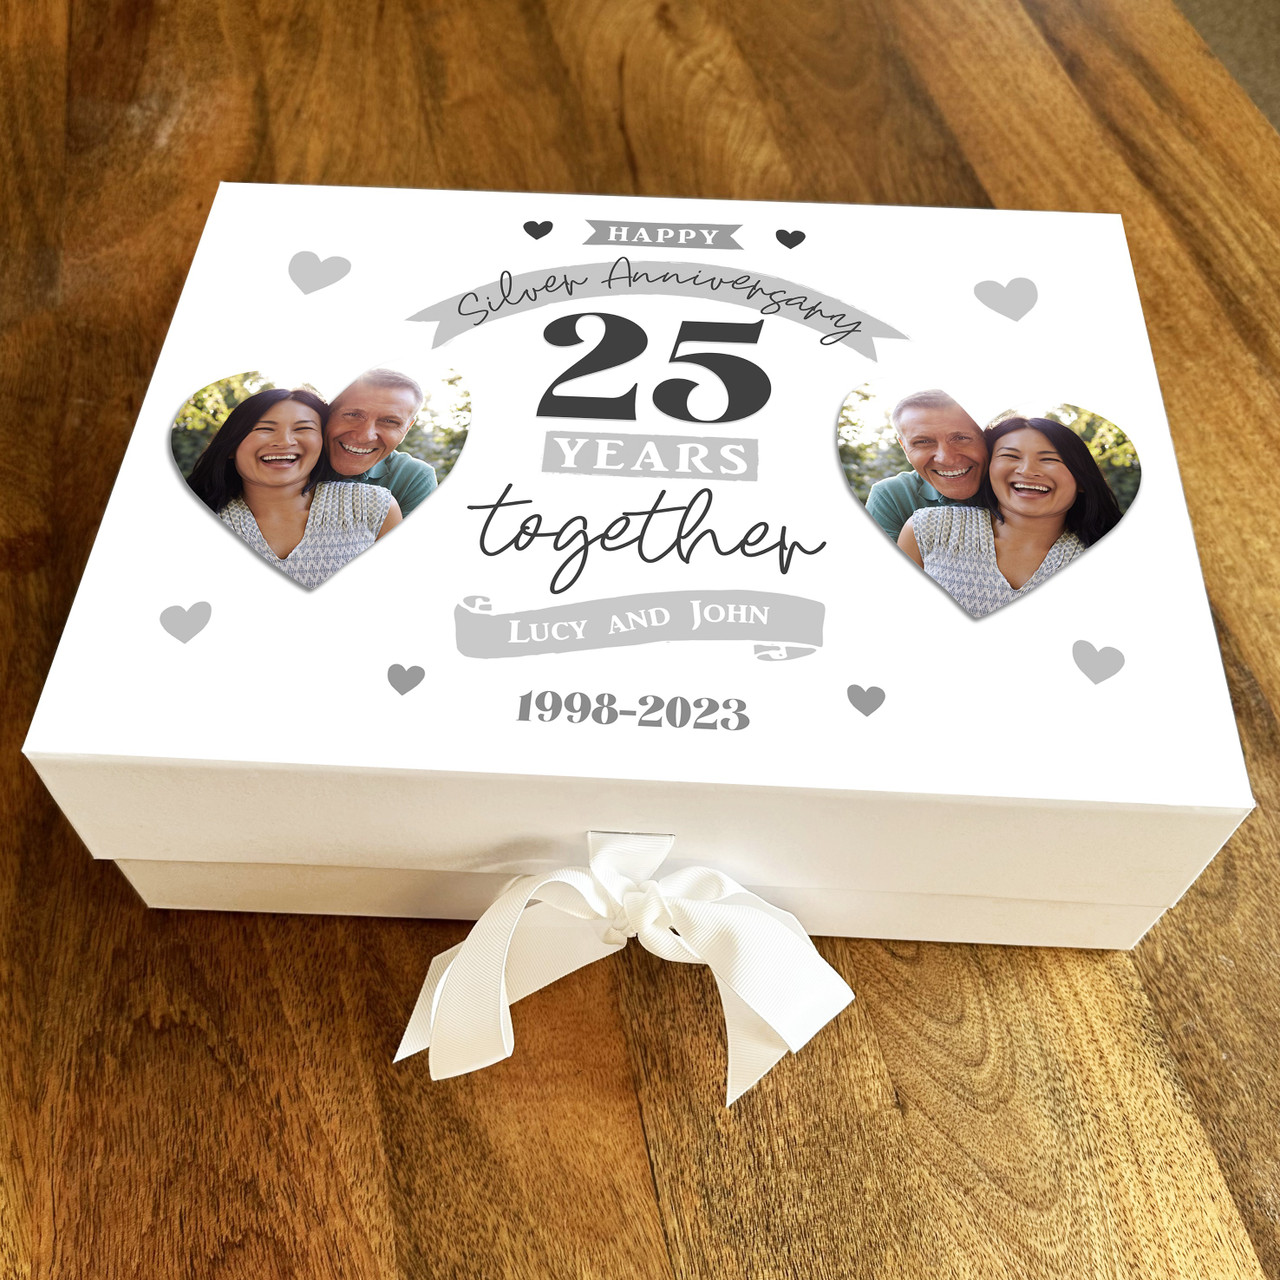 Personalised 40th Wedding Anniversary Gifts Ruby Wedding Anniversary Print  Gifts | eBay